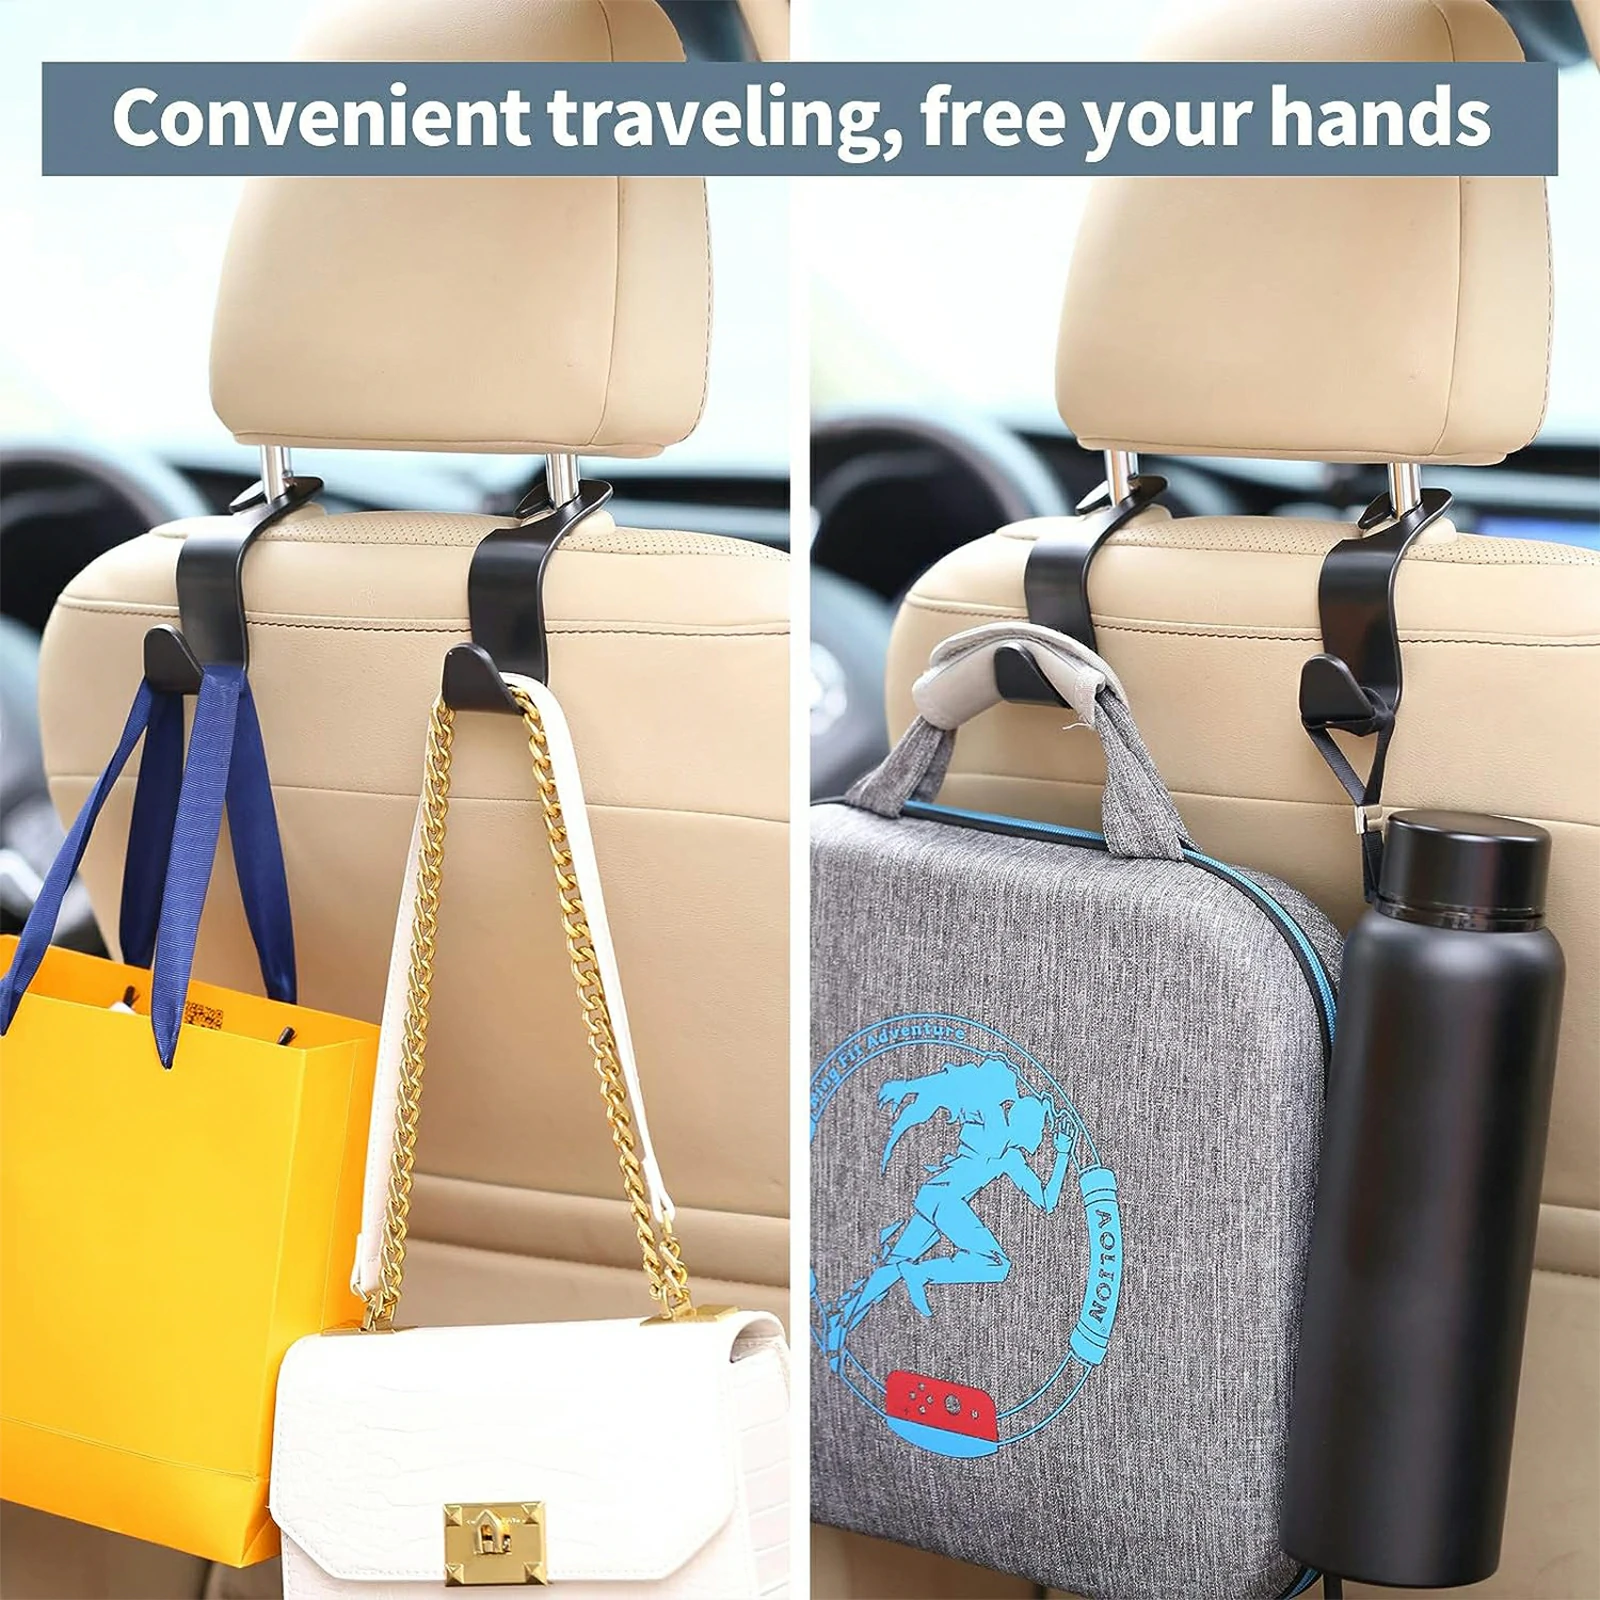 WOWTECHPROMOS: Comprehensive Car Accessory Gift Set for Companies